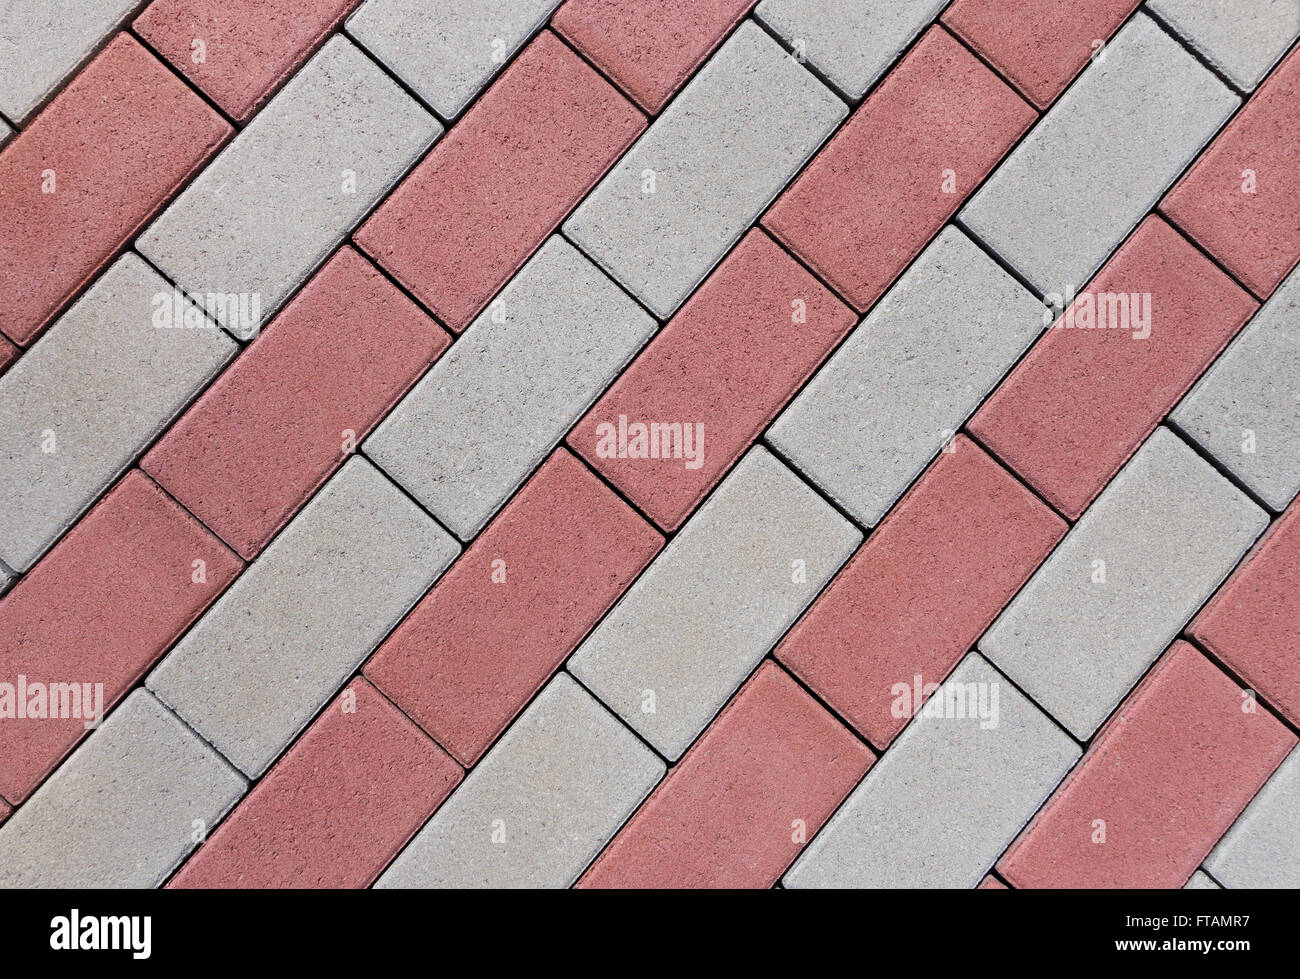 Diagonal pattern of rows of rectangular, red and gray cobblestones in close-up Stock Photo